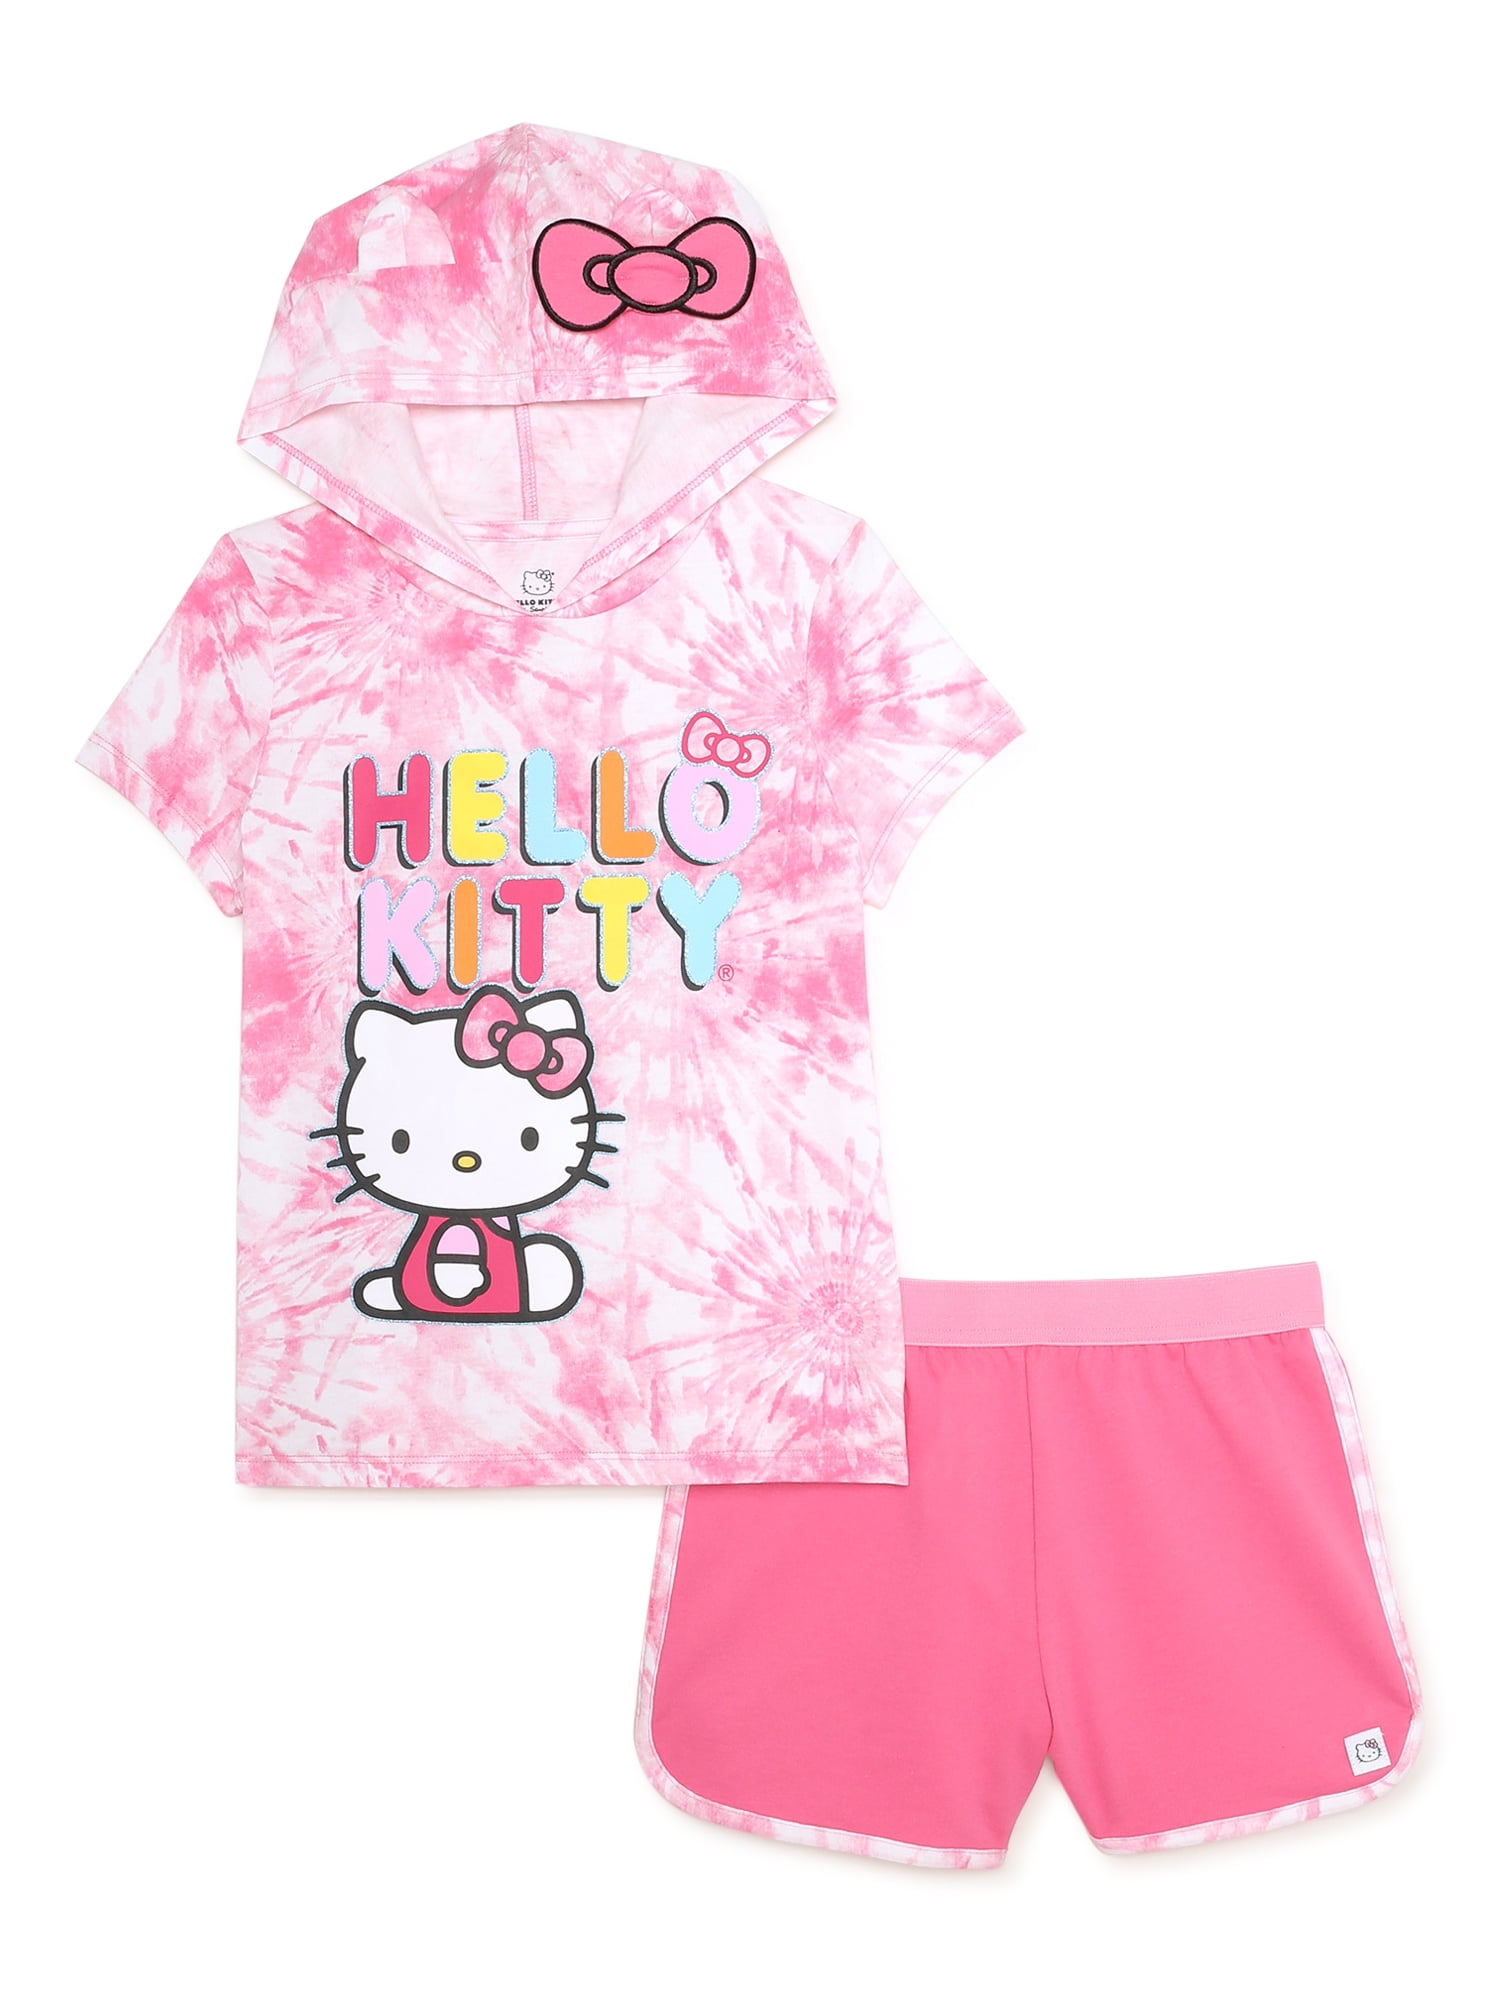 M&S 2 Piece Hello Kitty Dress & Leggings Set  Age 12-24 Months 2-3 Years RRP £14 